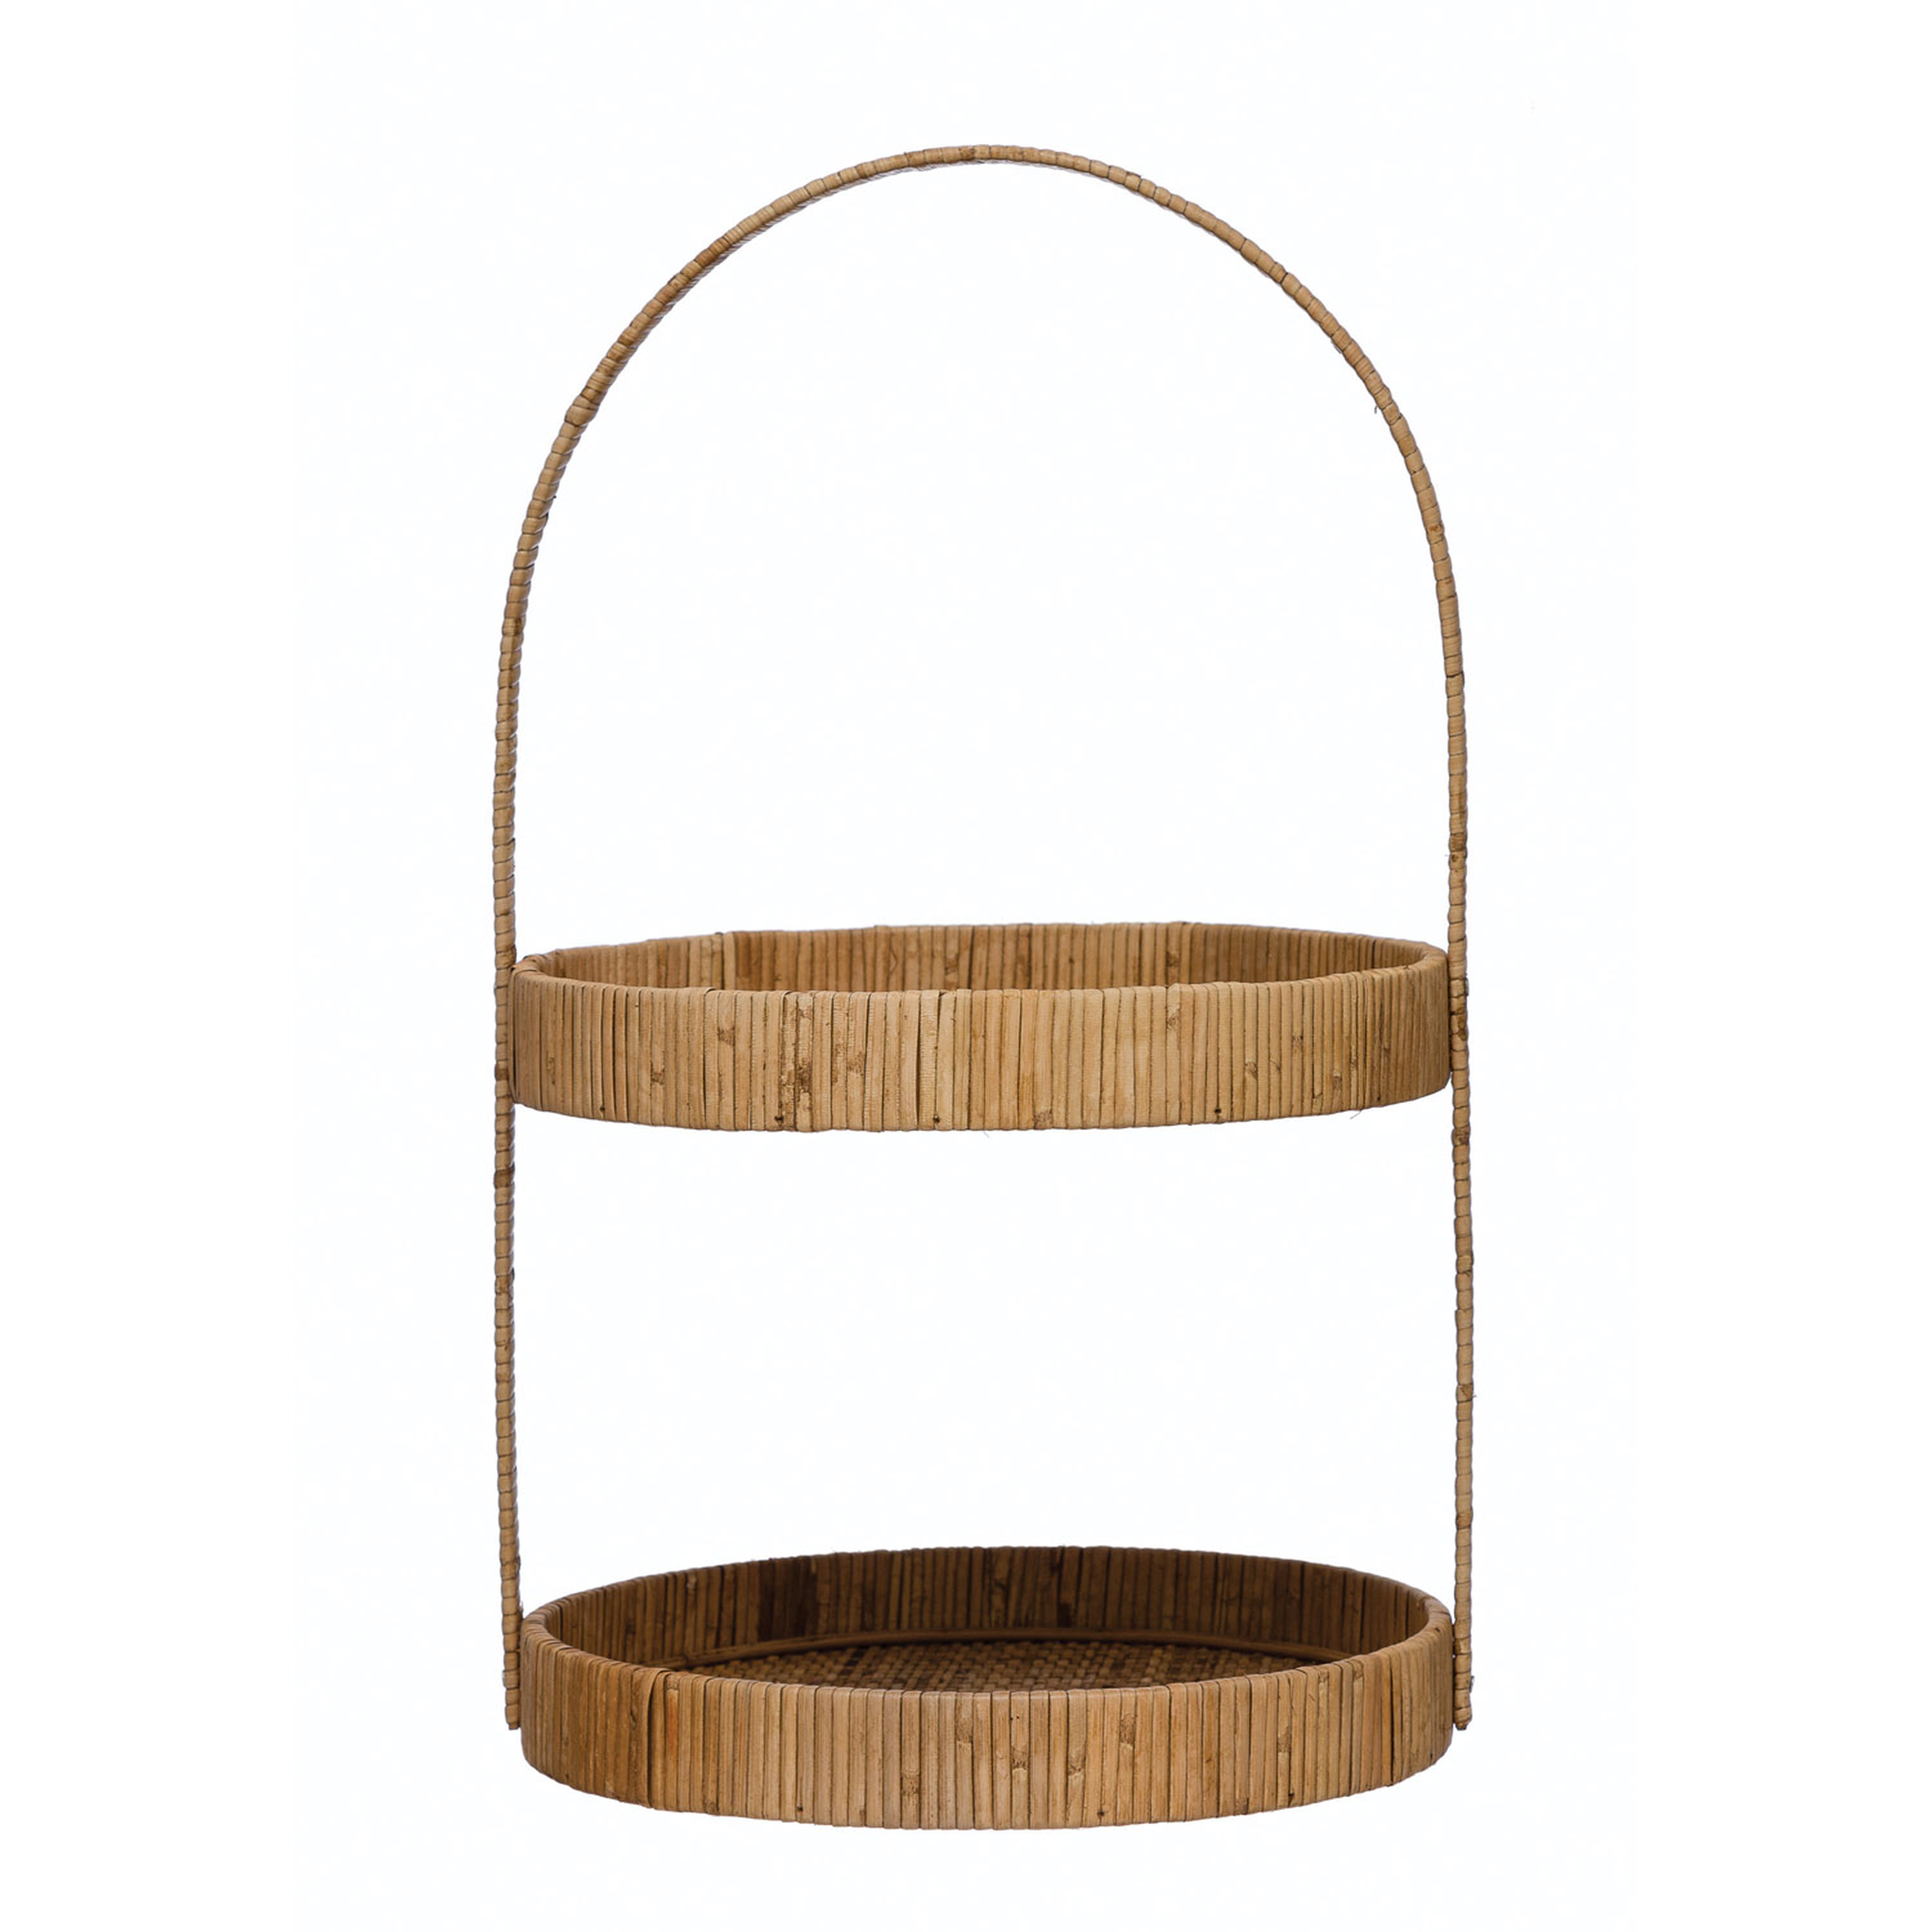 Decorative Hand-Woven Rattan 2-Tier Tray with Handle - Moss & Wilder